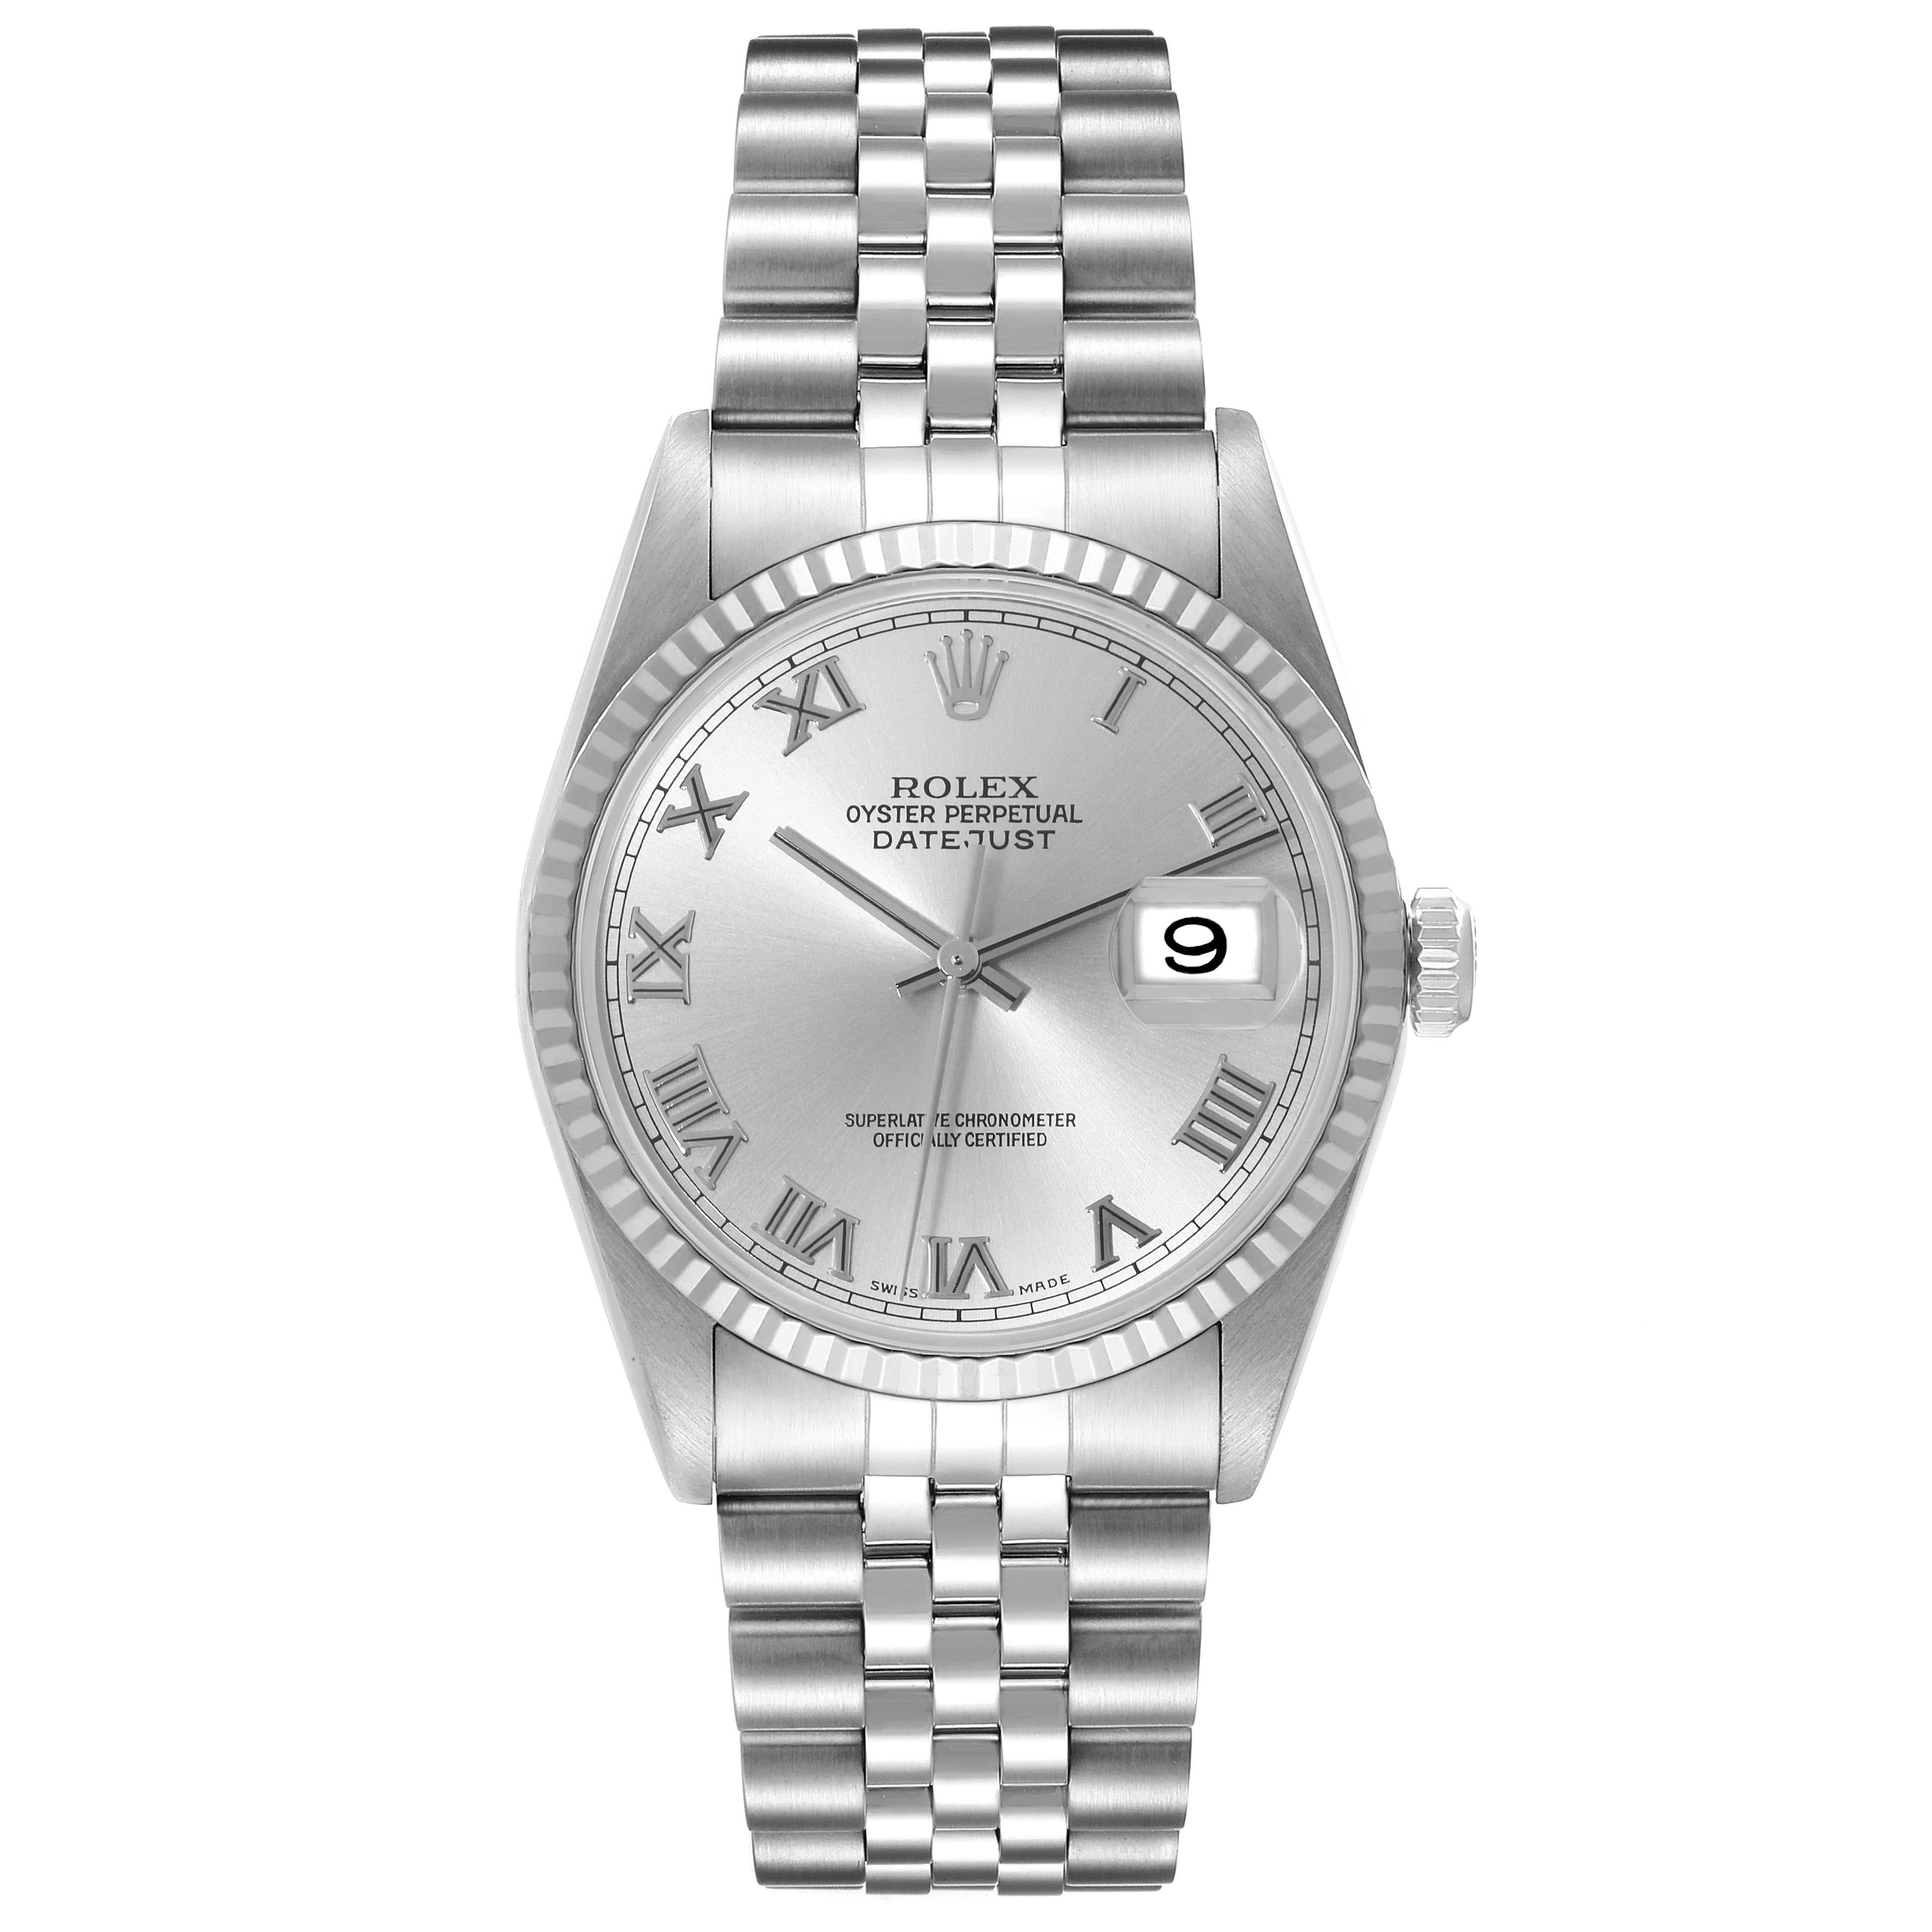 Rolex Datejust 36 Steel White Gold Silver Roman Dial Mens Watch 16234 Box Papers. Officially certified chronometer automatic self-winding movement. Stainless steel oyster case 36 mm in diameter. Rolex logo on a crown. 18k white gold fluted bezel.